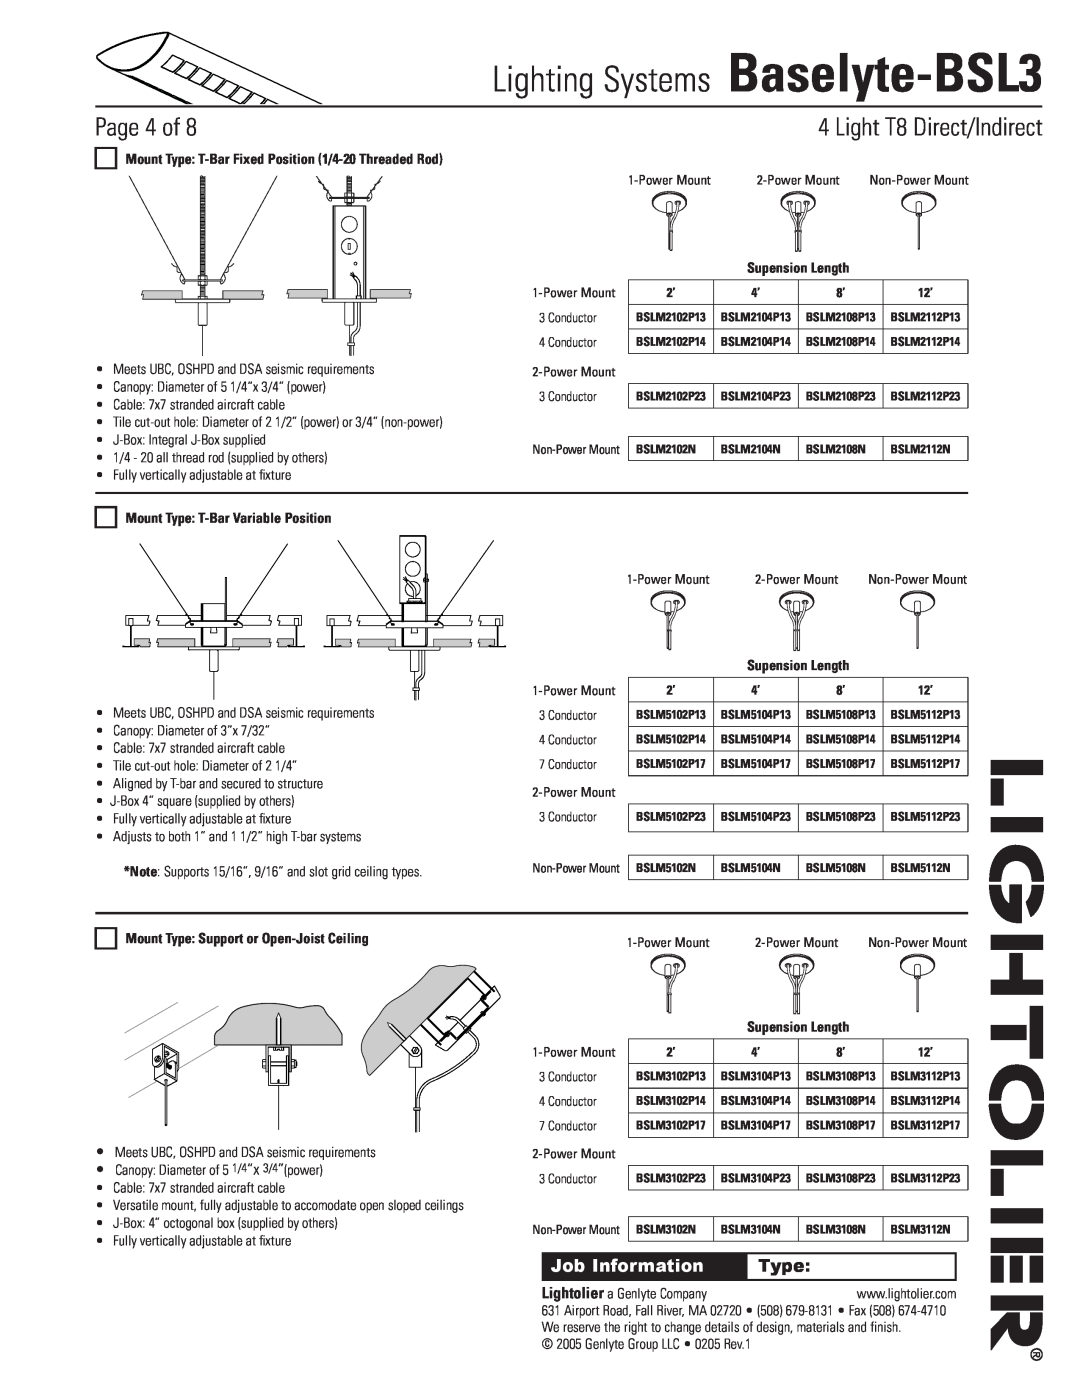 Lightolier Baselyte-BSL3 specifications Mount Type T-BarVariable Position, Mount Type Support or Open-JoistCeiling, Page of 